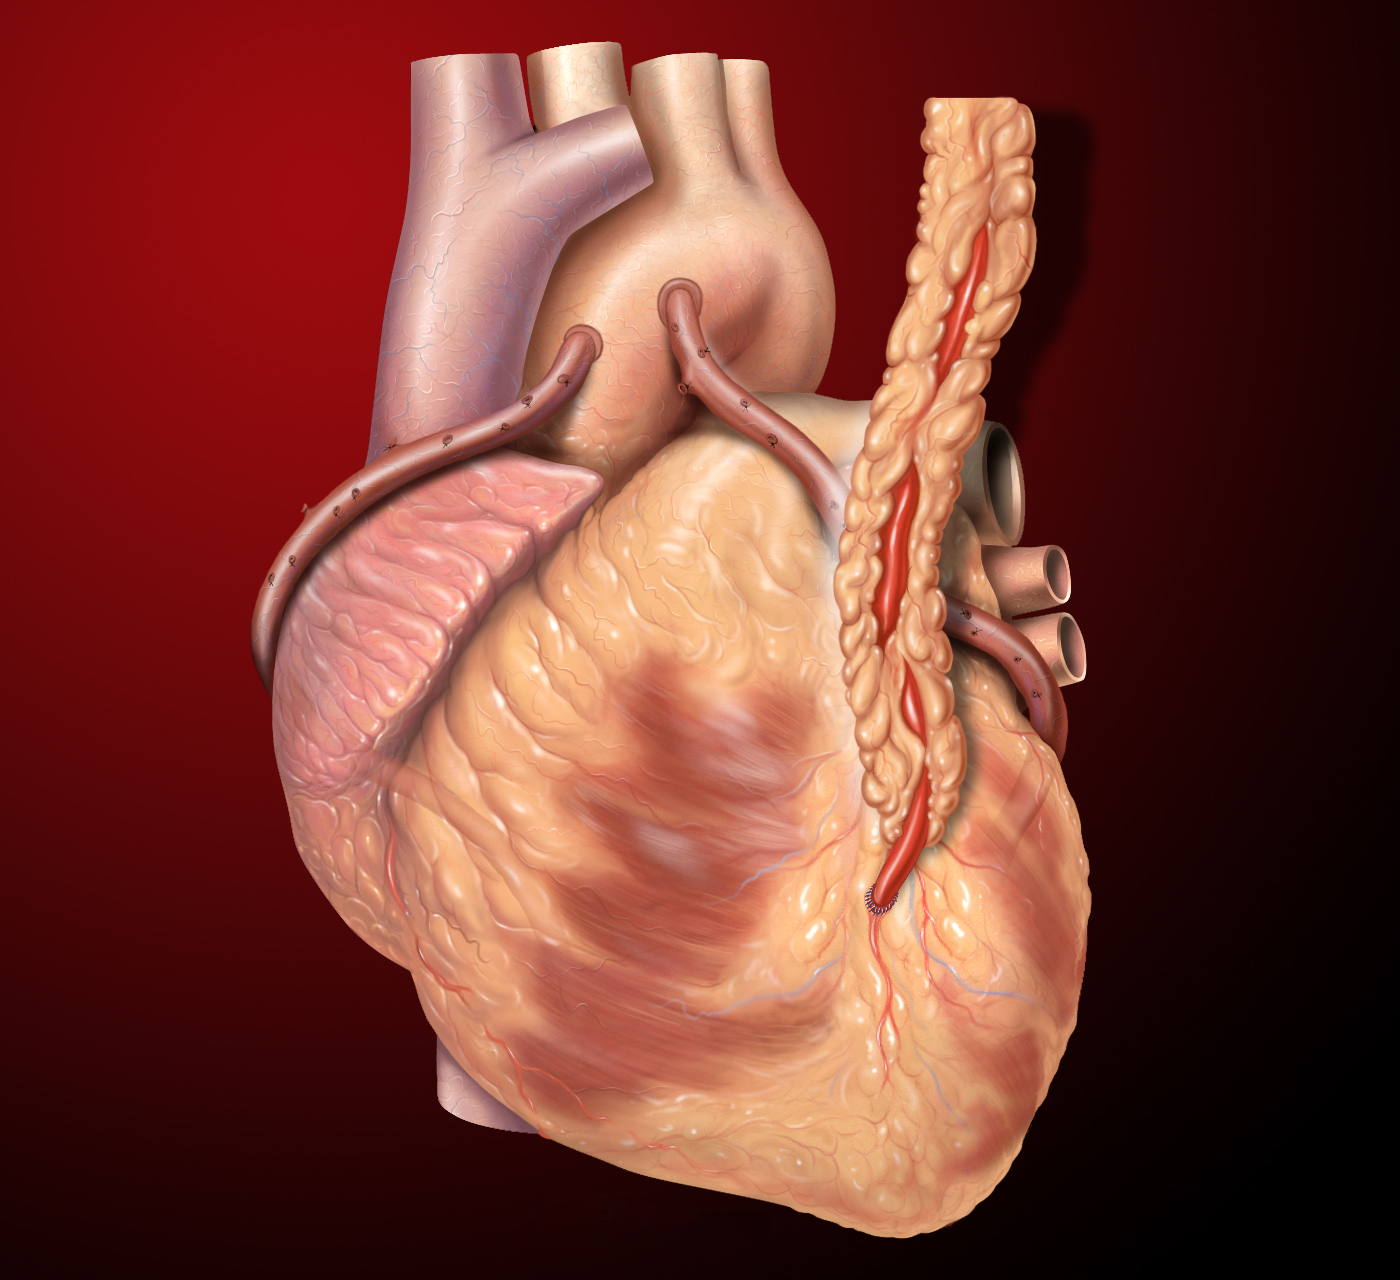 Three coronary artery bypass grafts. Left internal thoracic artery to left anterior descending artery; as well as two saphenous vein grafts.